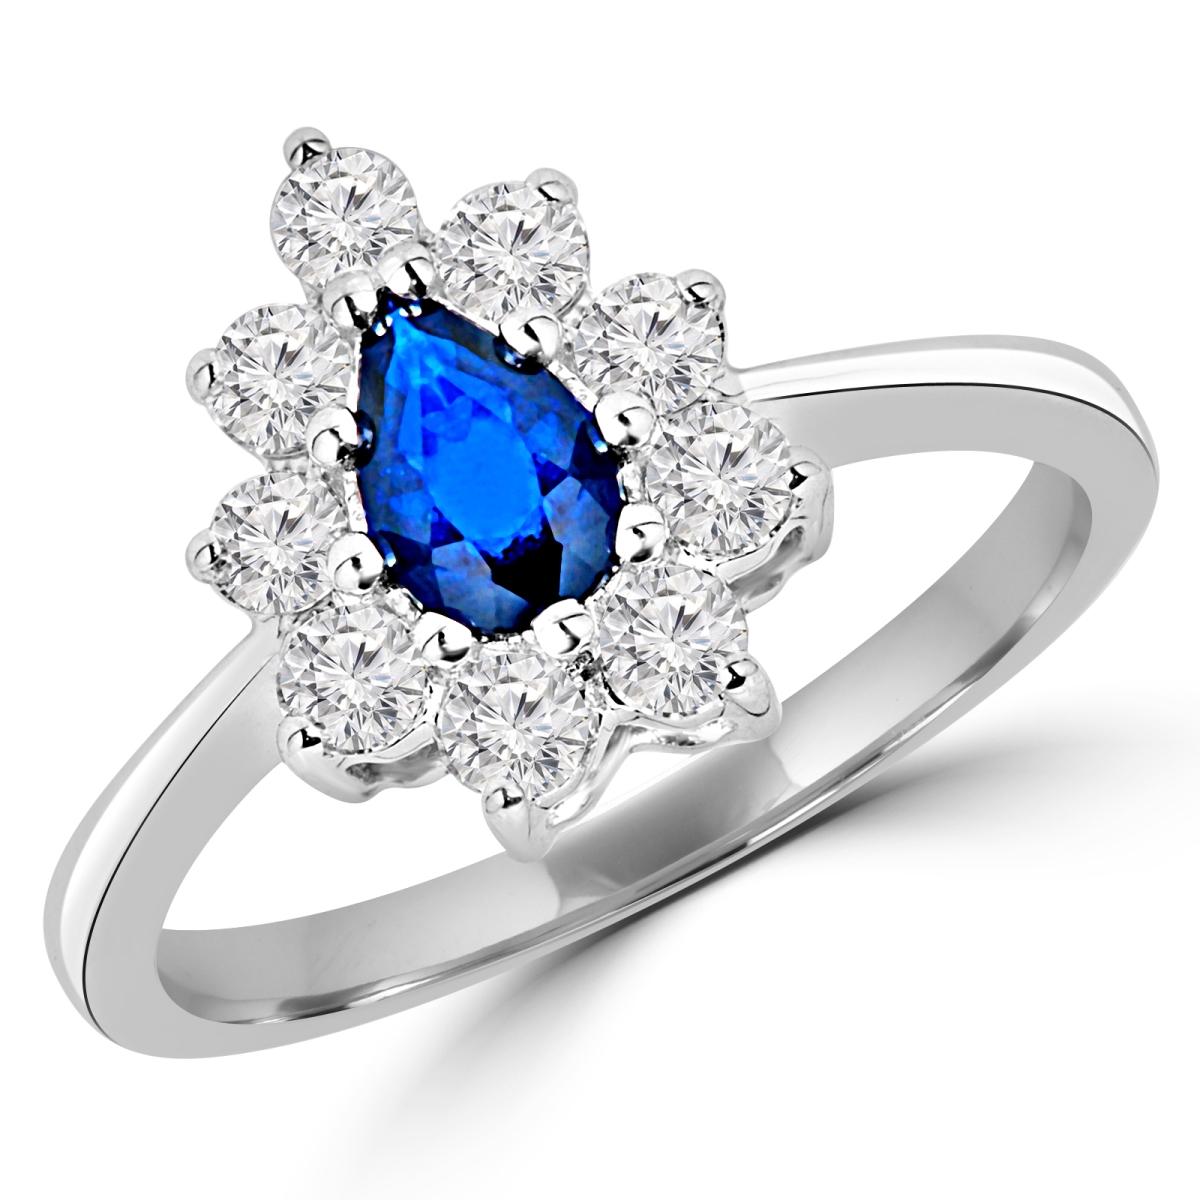 Picture of Majesty Diamonds MD180236-3.25 1 CTW Pear Blue Sapphire Halo Cocktail Ring in 14K White Gold - Size 3.25